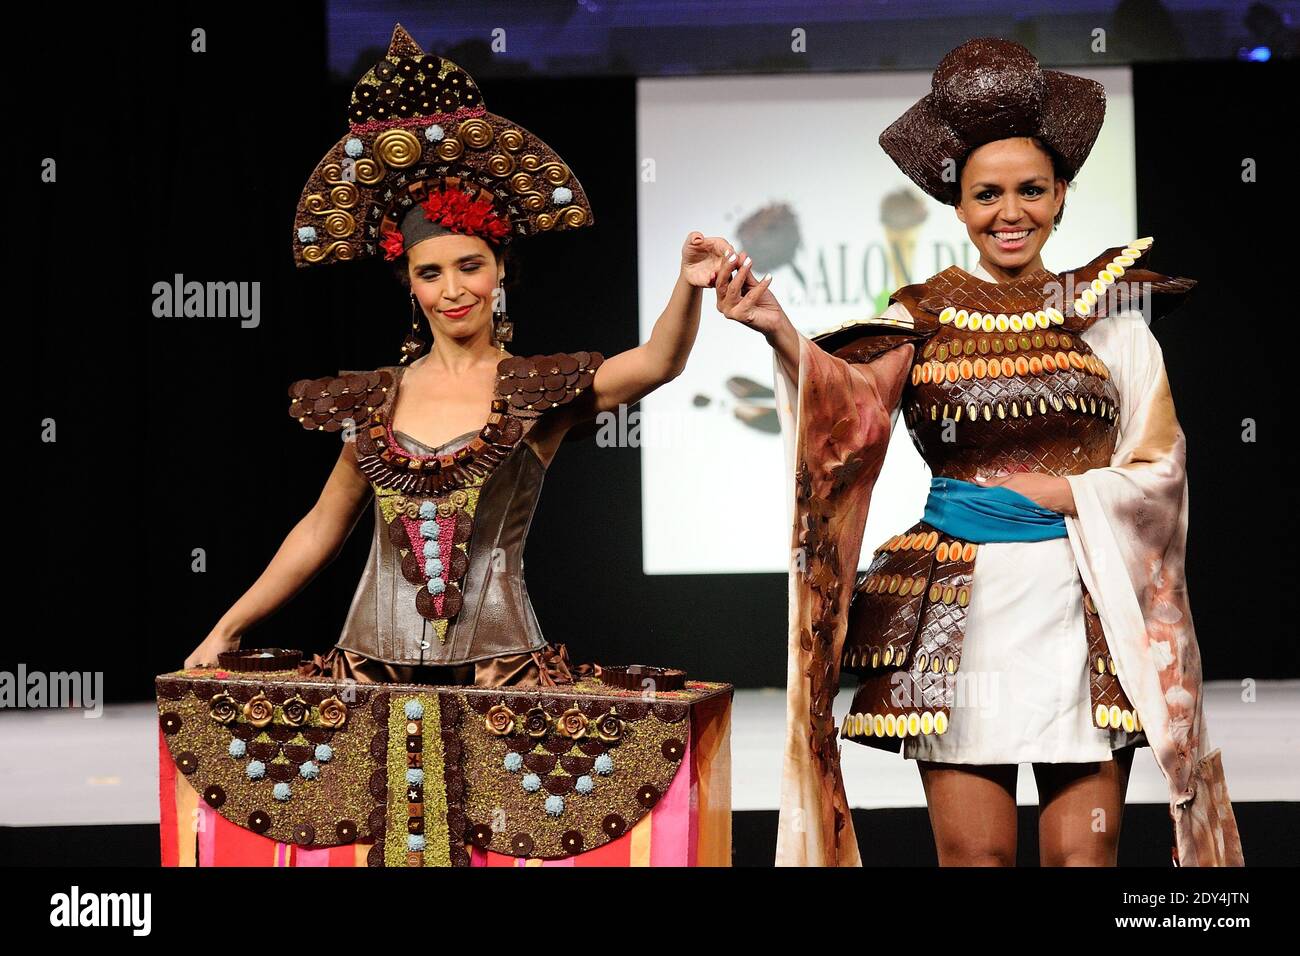 Aida Touhiri displaying a dress designed by Maison Rannou-Metivier and Laurence Roustandjee displaying a dress designed by Audrey Lempeseur and chocolated by Frederic Cassel during the 20th Salon du Chocolat held at Porte de Versailles in Paris, France on October 28, 2014. Photo by Aurore Marechal/ABACAPRESS.COM Stock Photo